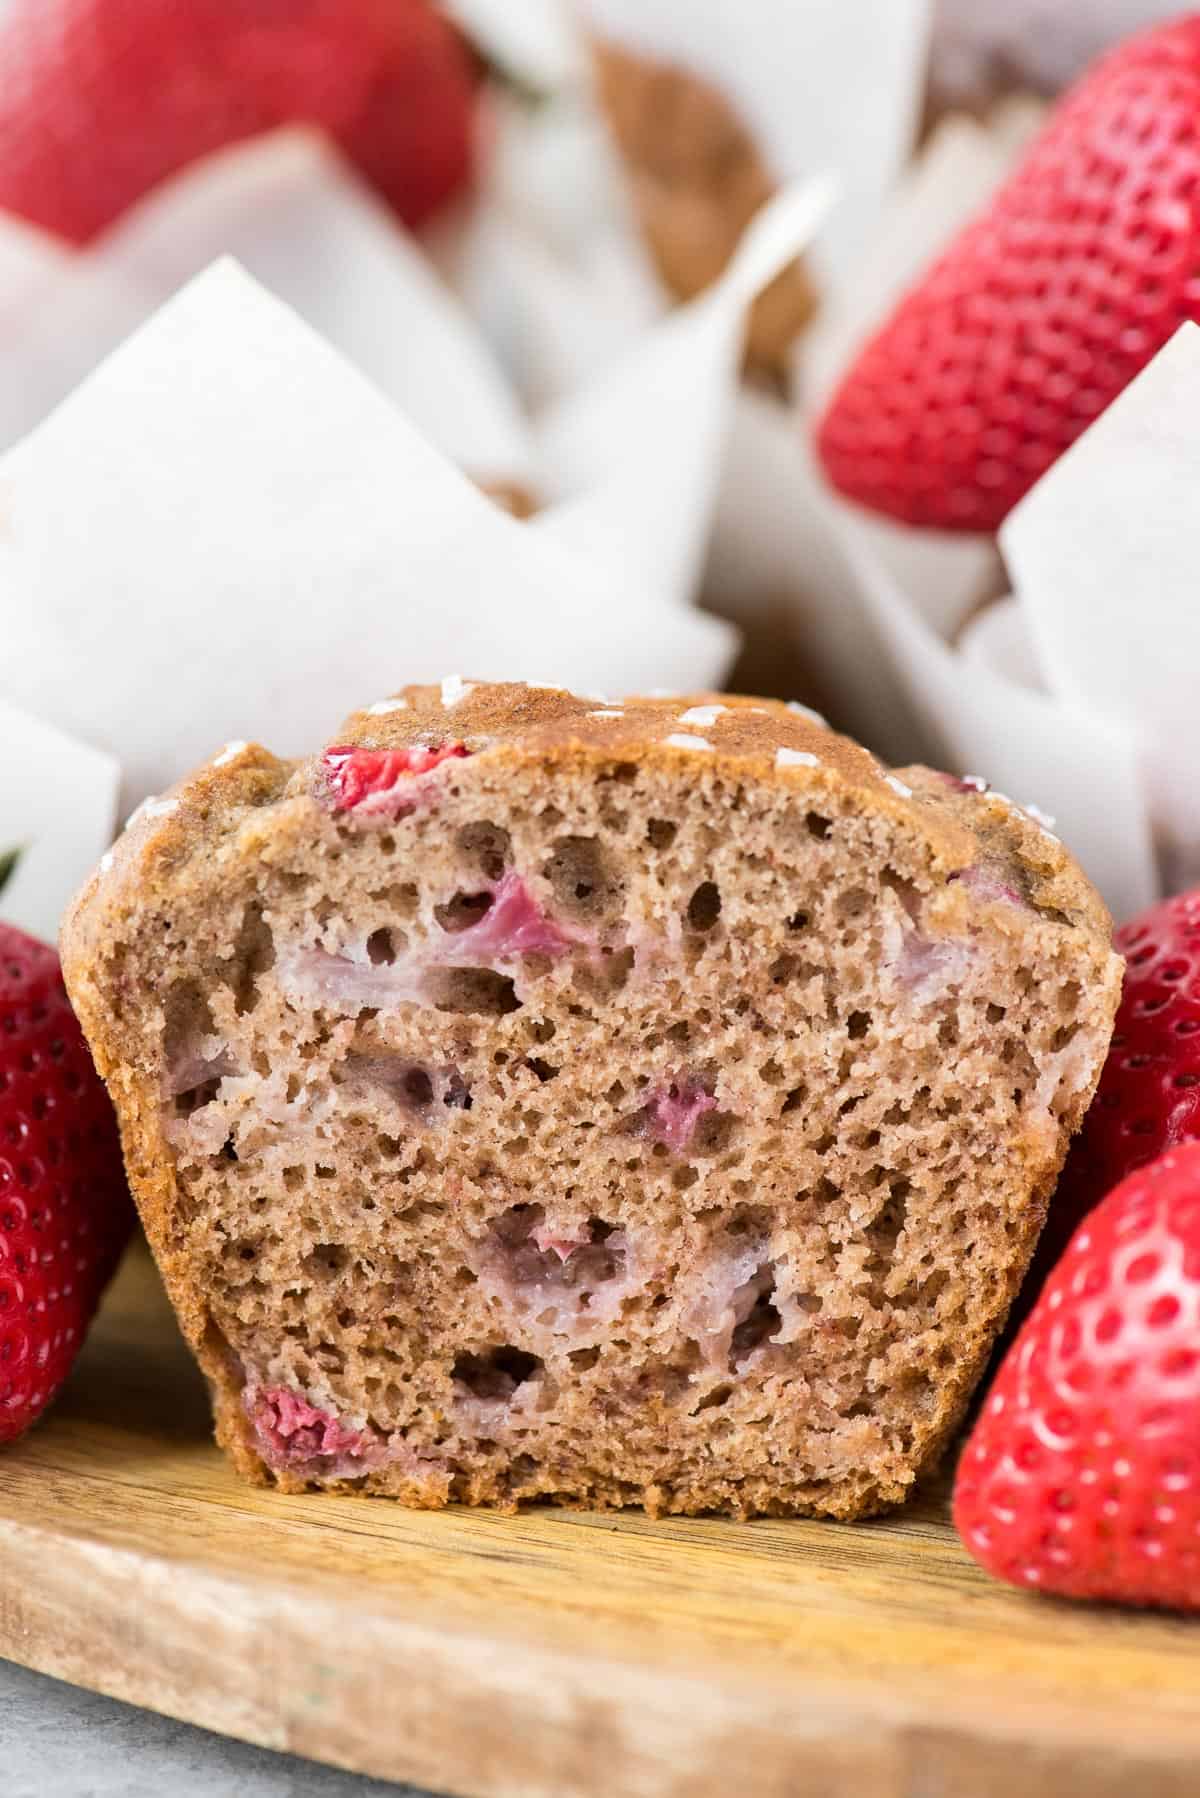 strawberry banana muffin cut in half on wooden background